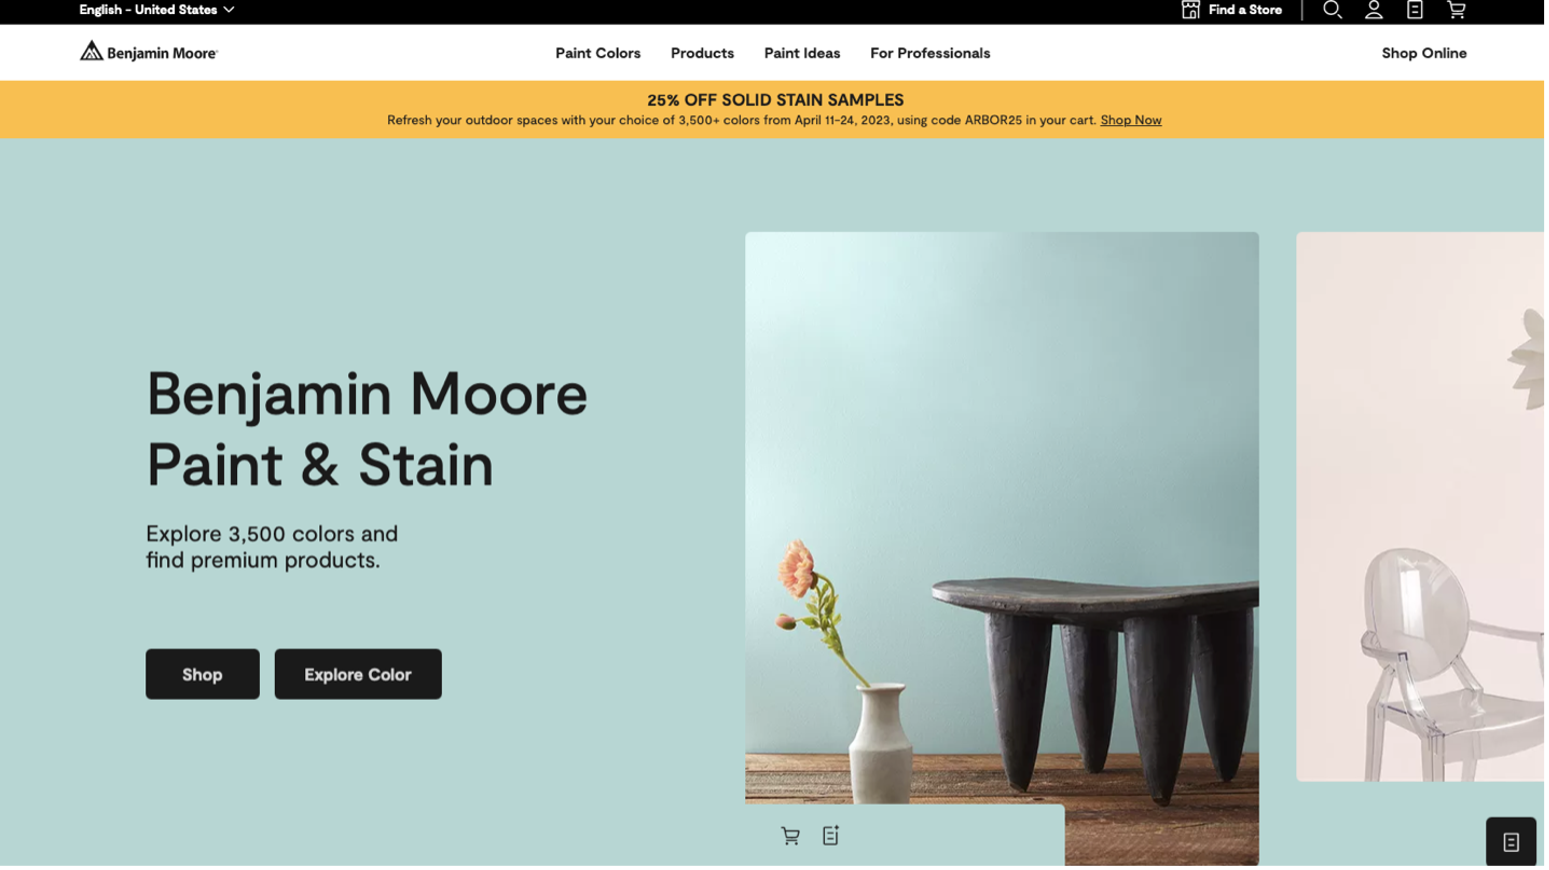 Participants disliked the pop ups (which did contribute to a cluttered feel) on the Benjamin Moore website but overall, felt that it had a simple design. 